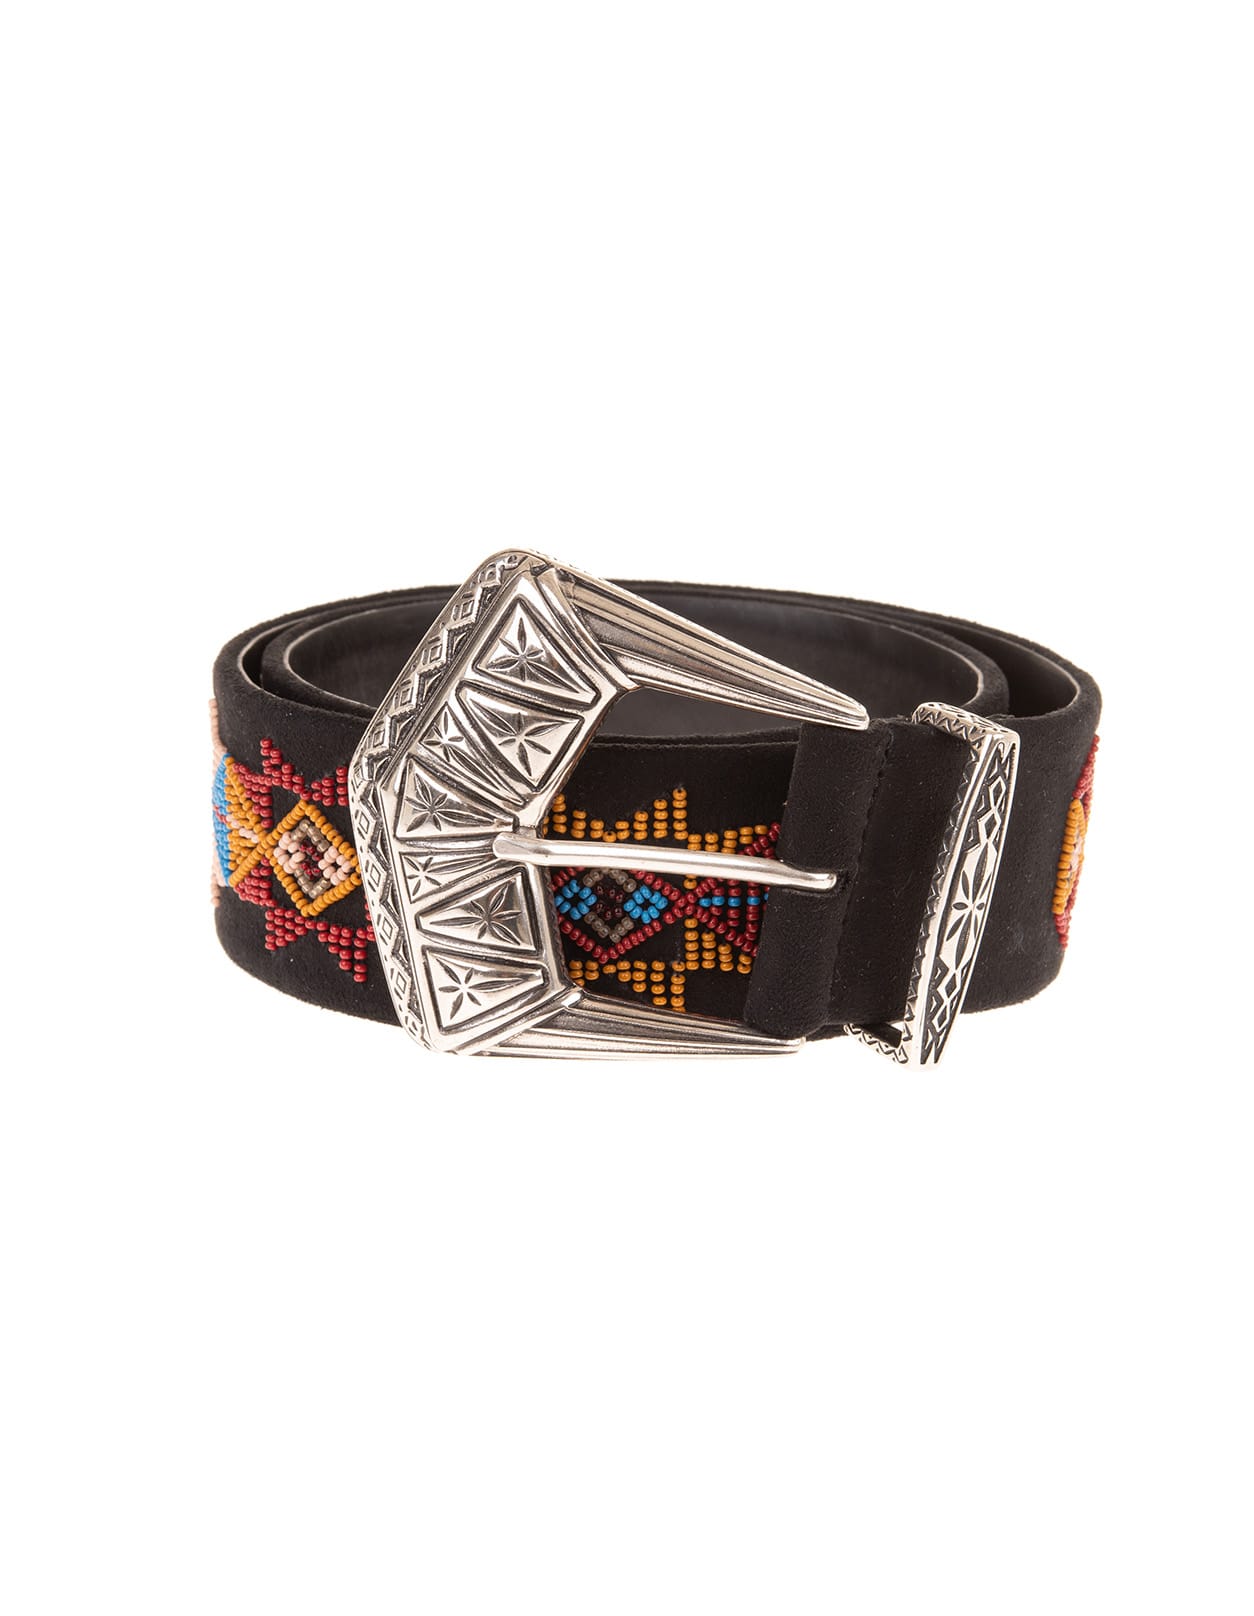 Etro Woman Embroidered Leather Belt With Metallic Buckle